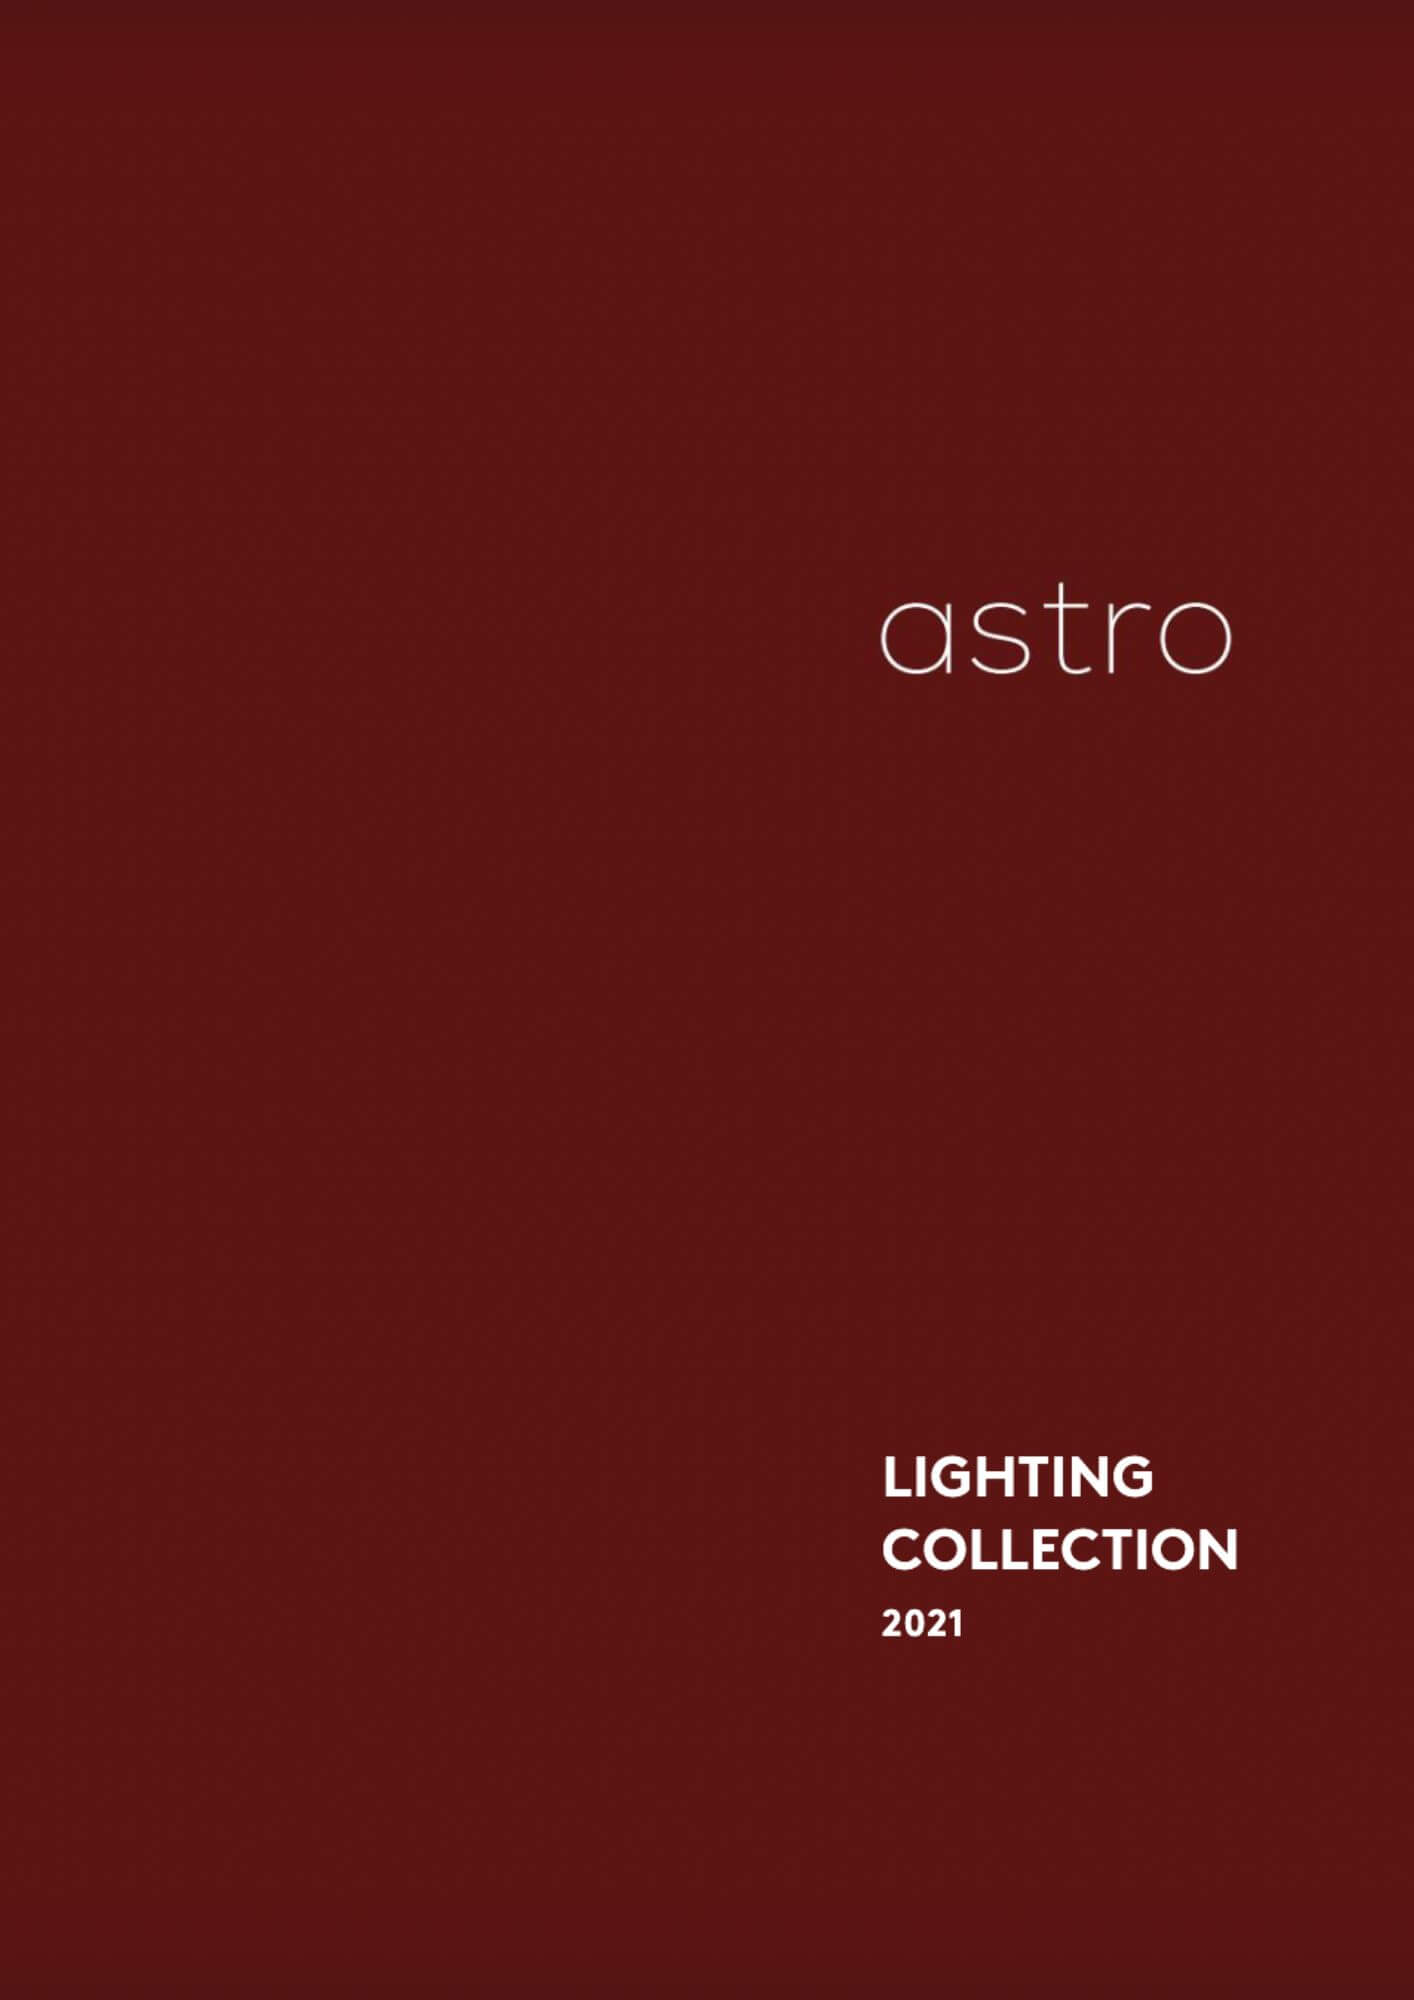 Astro Lighting Collection 2021